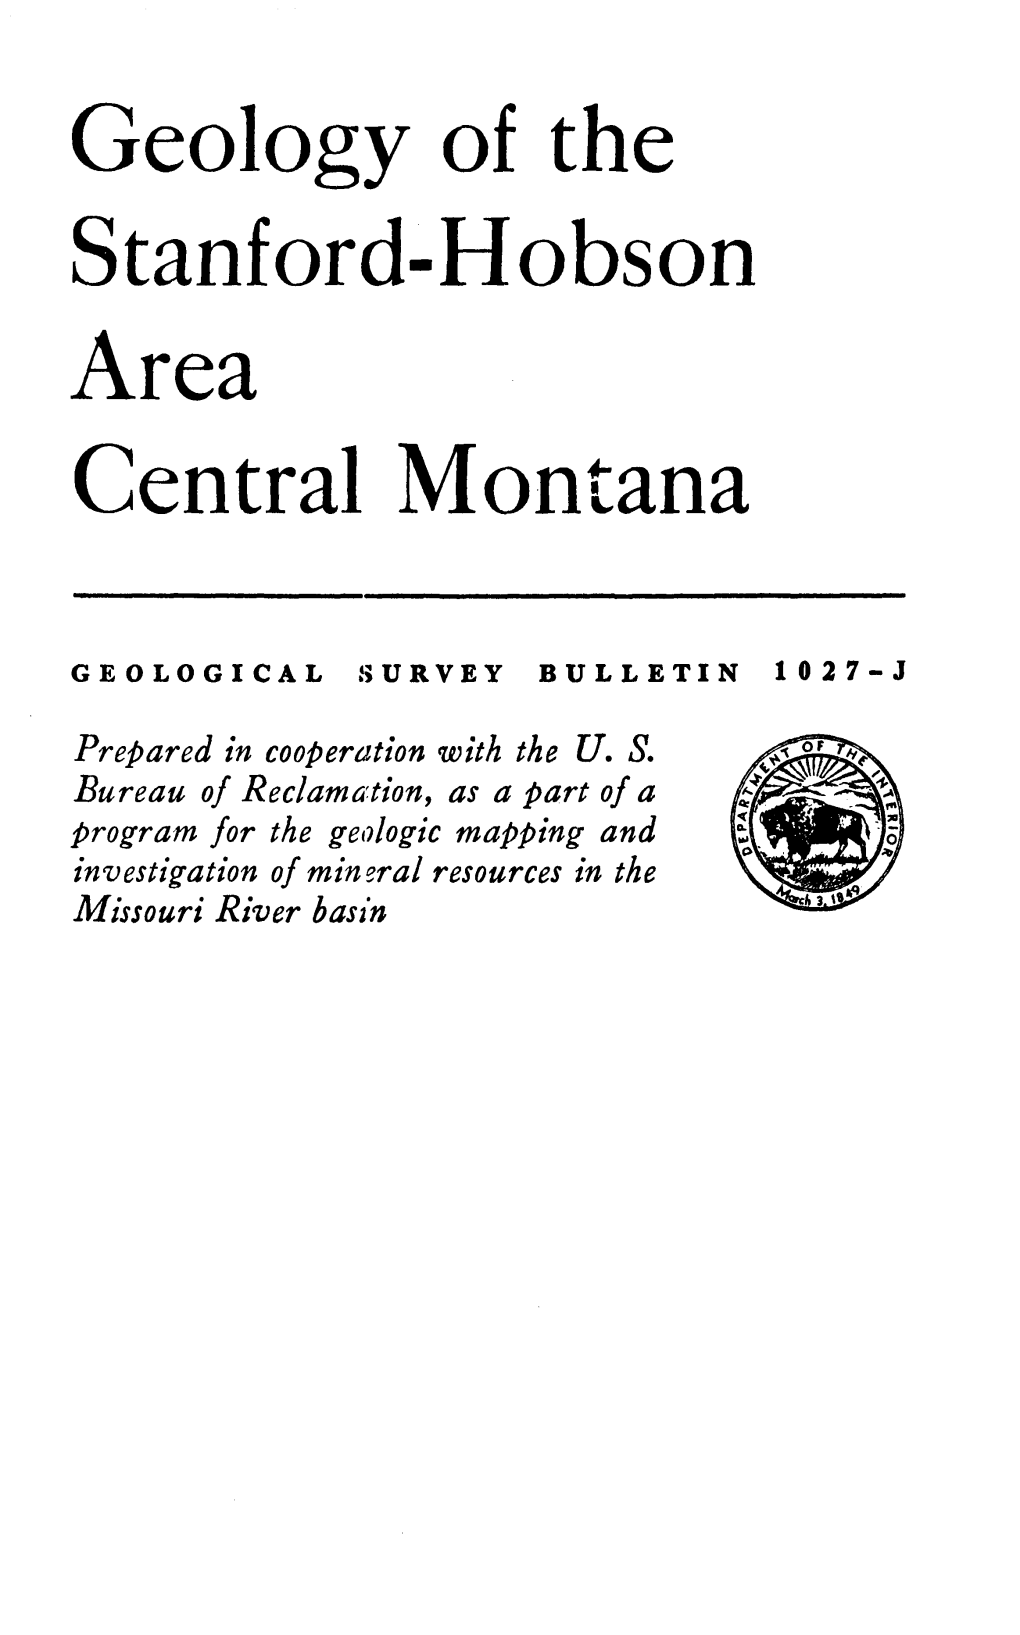 Geology of the Stanford-Hobson Area Central Montana